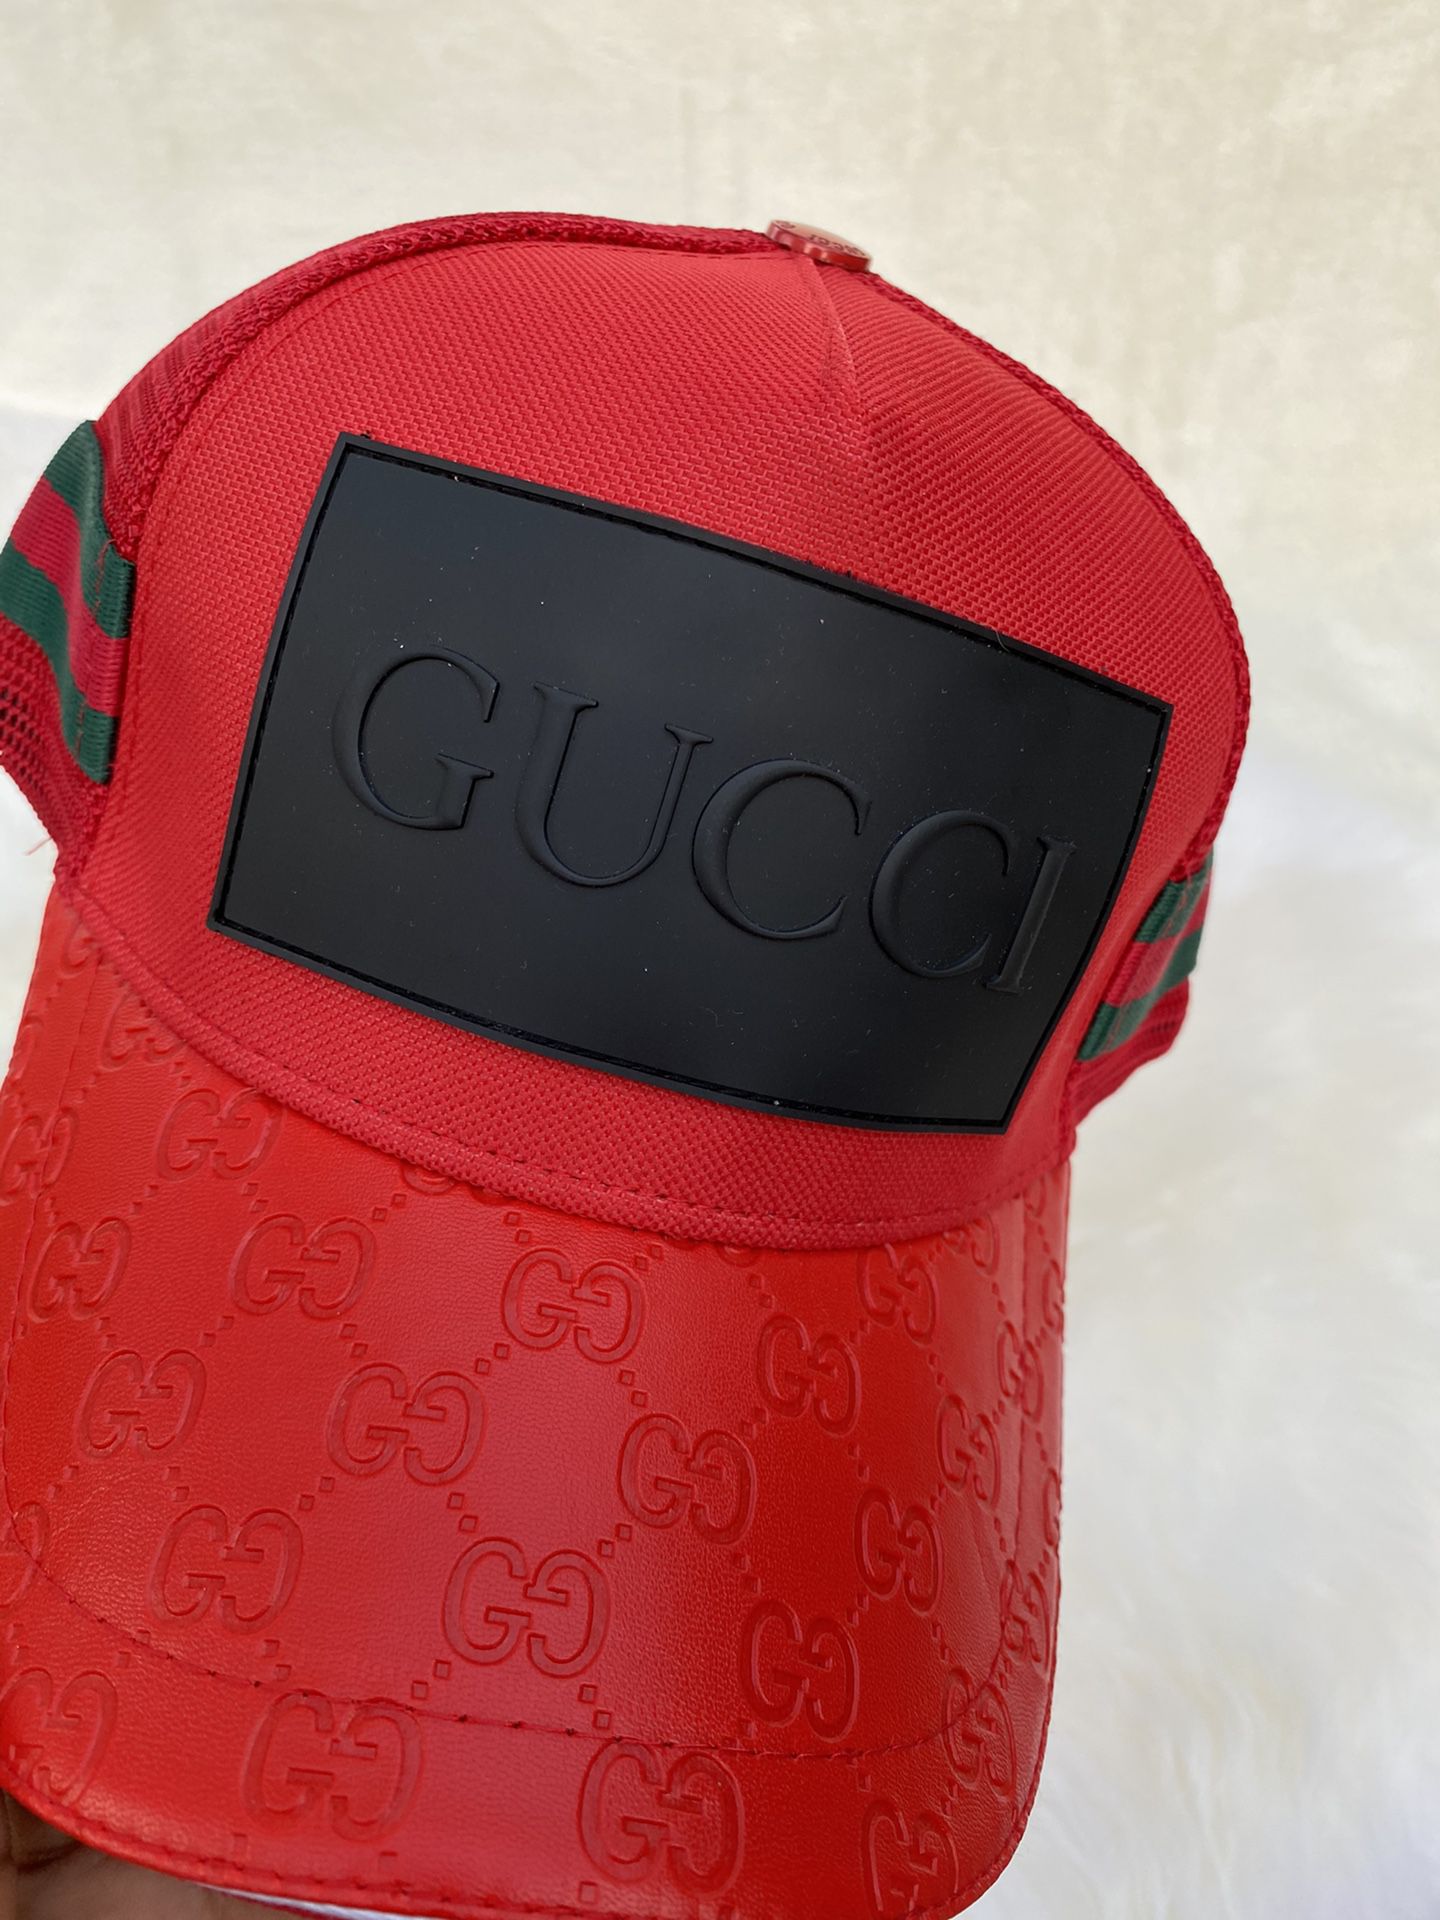 Red Gucci hat